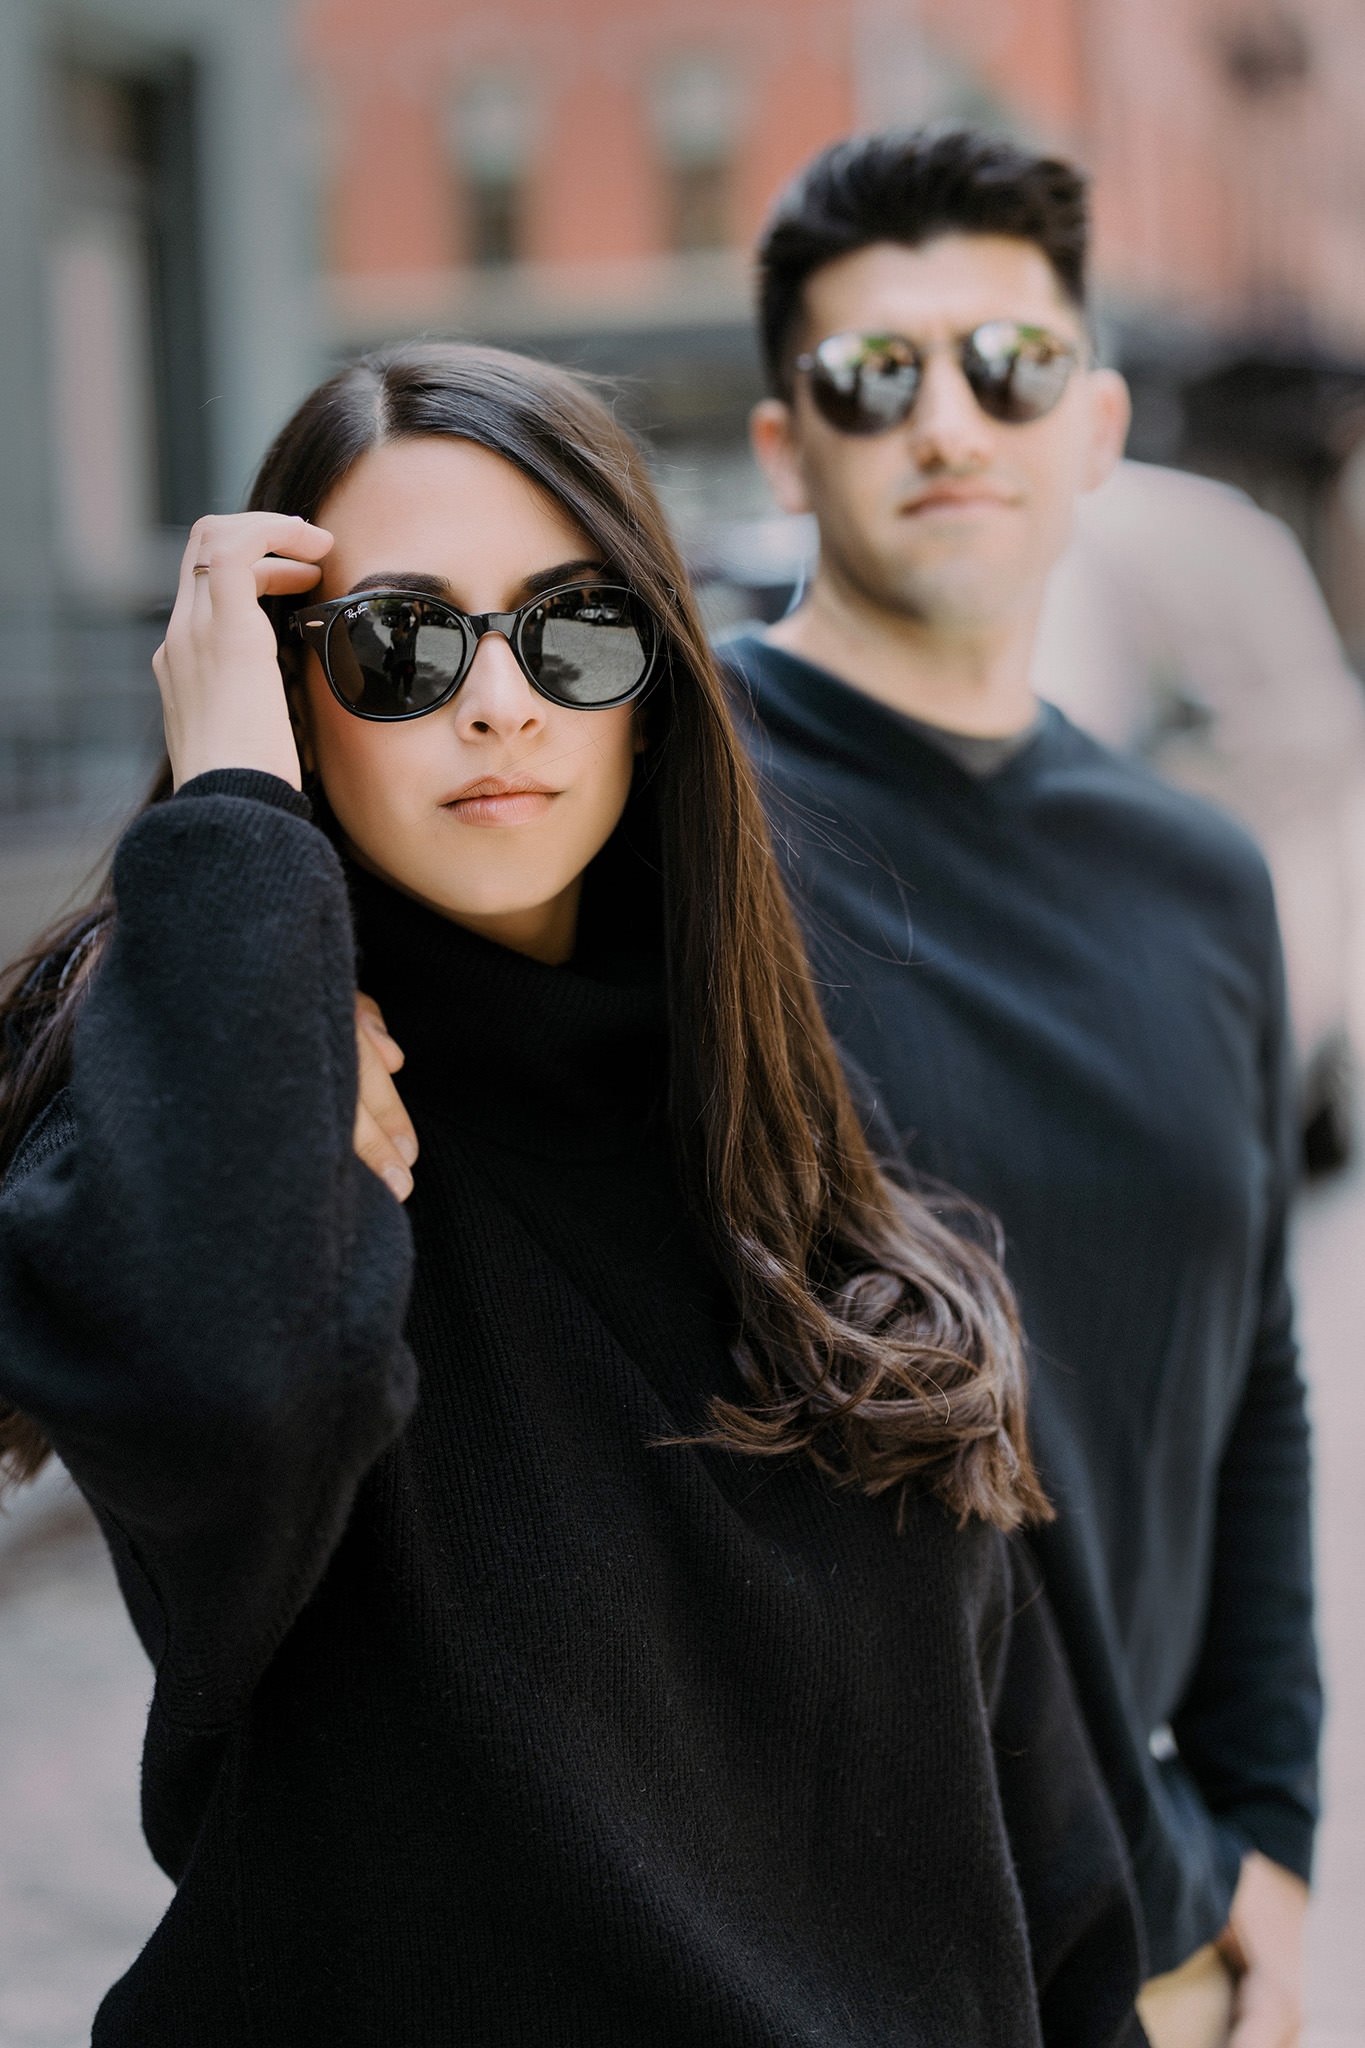 Engaged couple standing together wearing sunglasses in streets of Tribeca